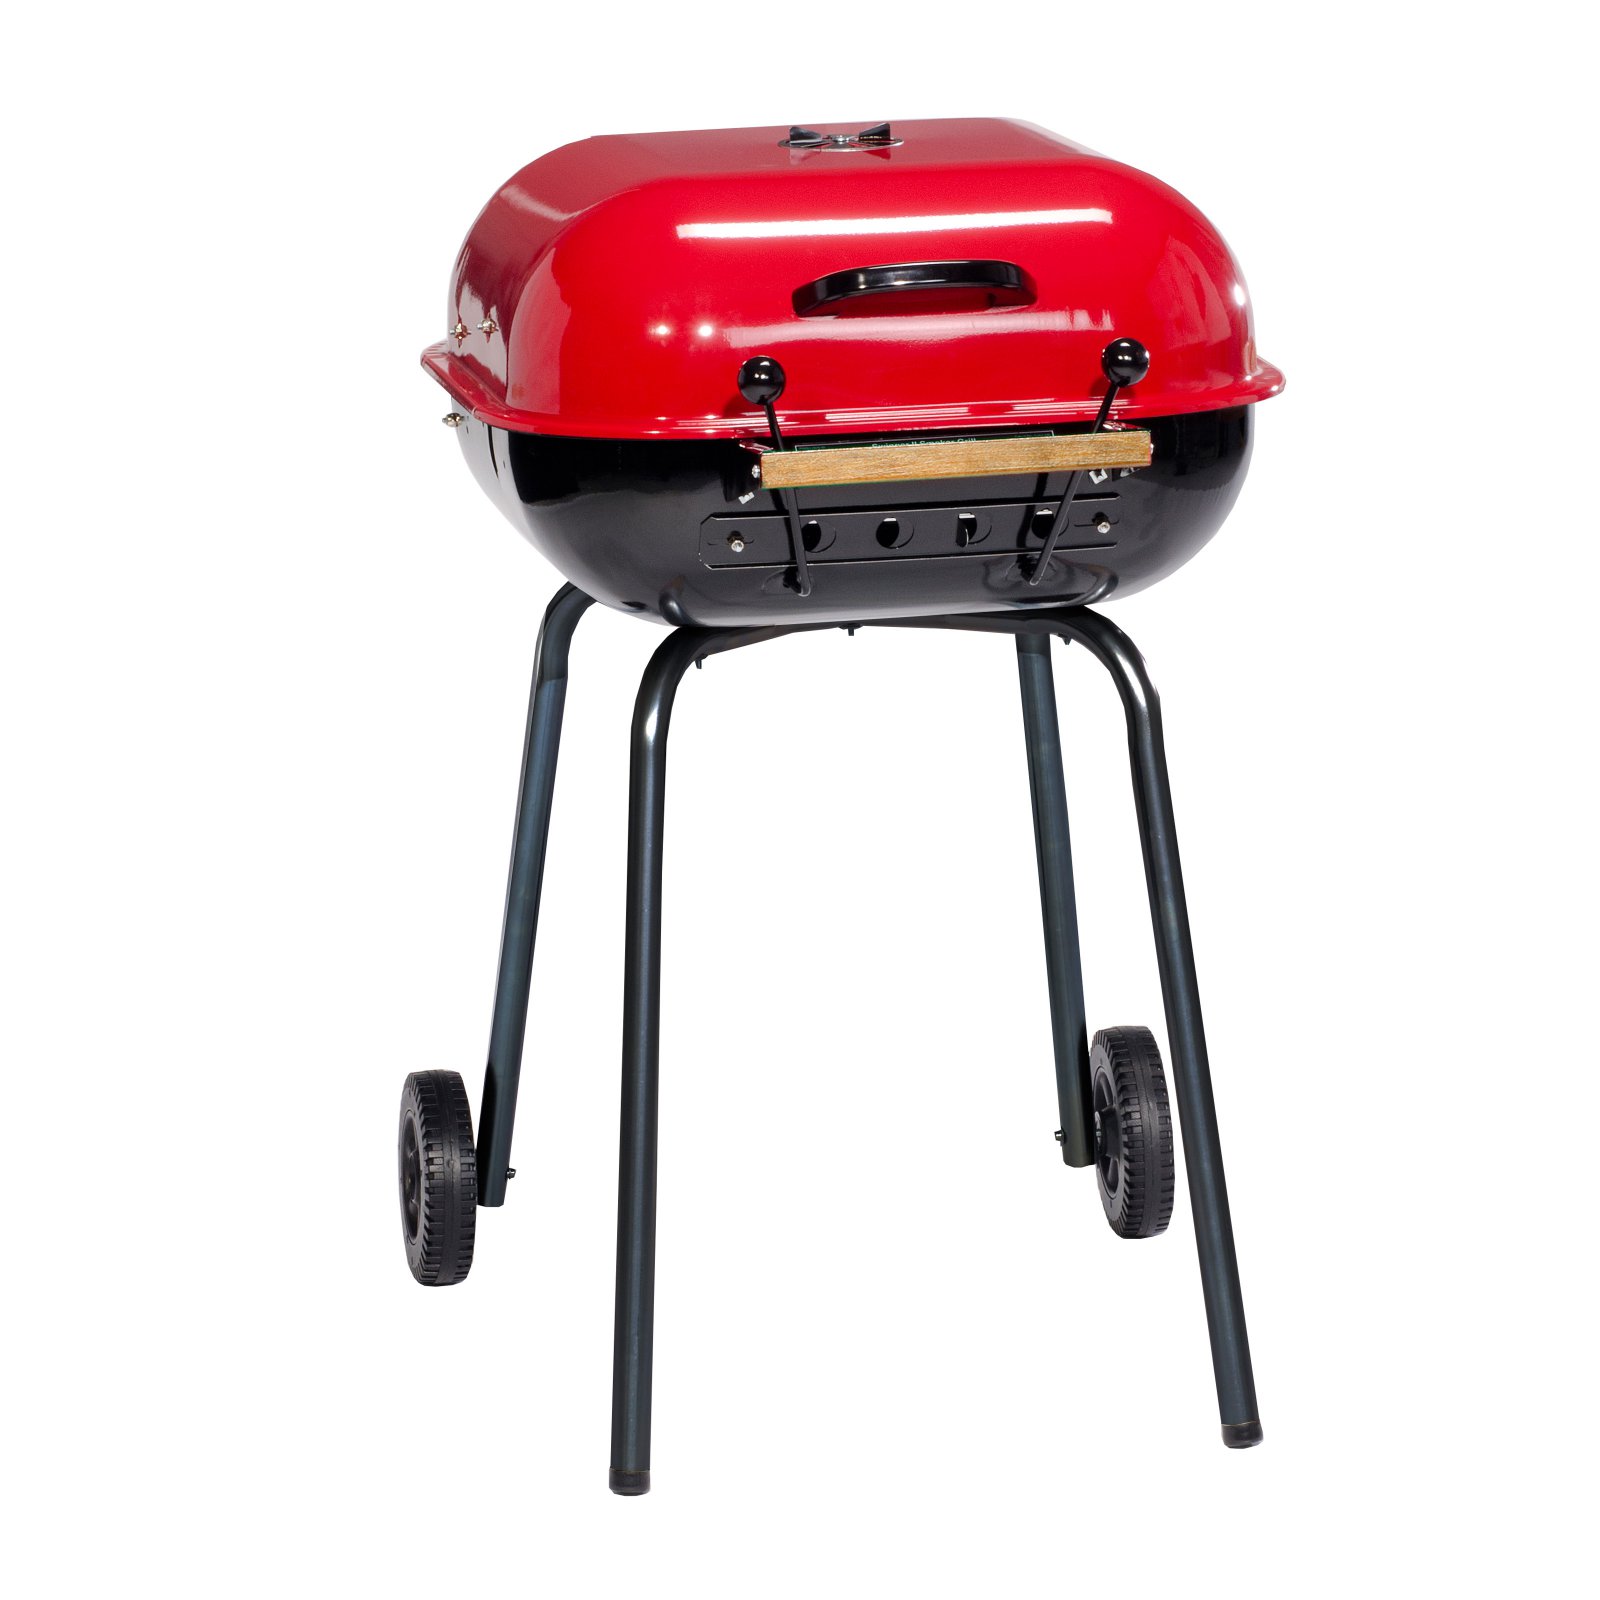 Americana Swinger 6 Position Charcoal Grill - image 1 of 8